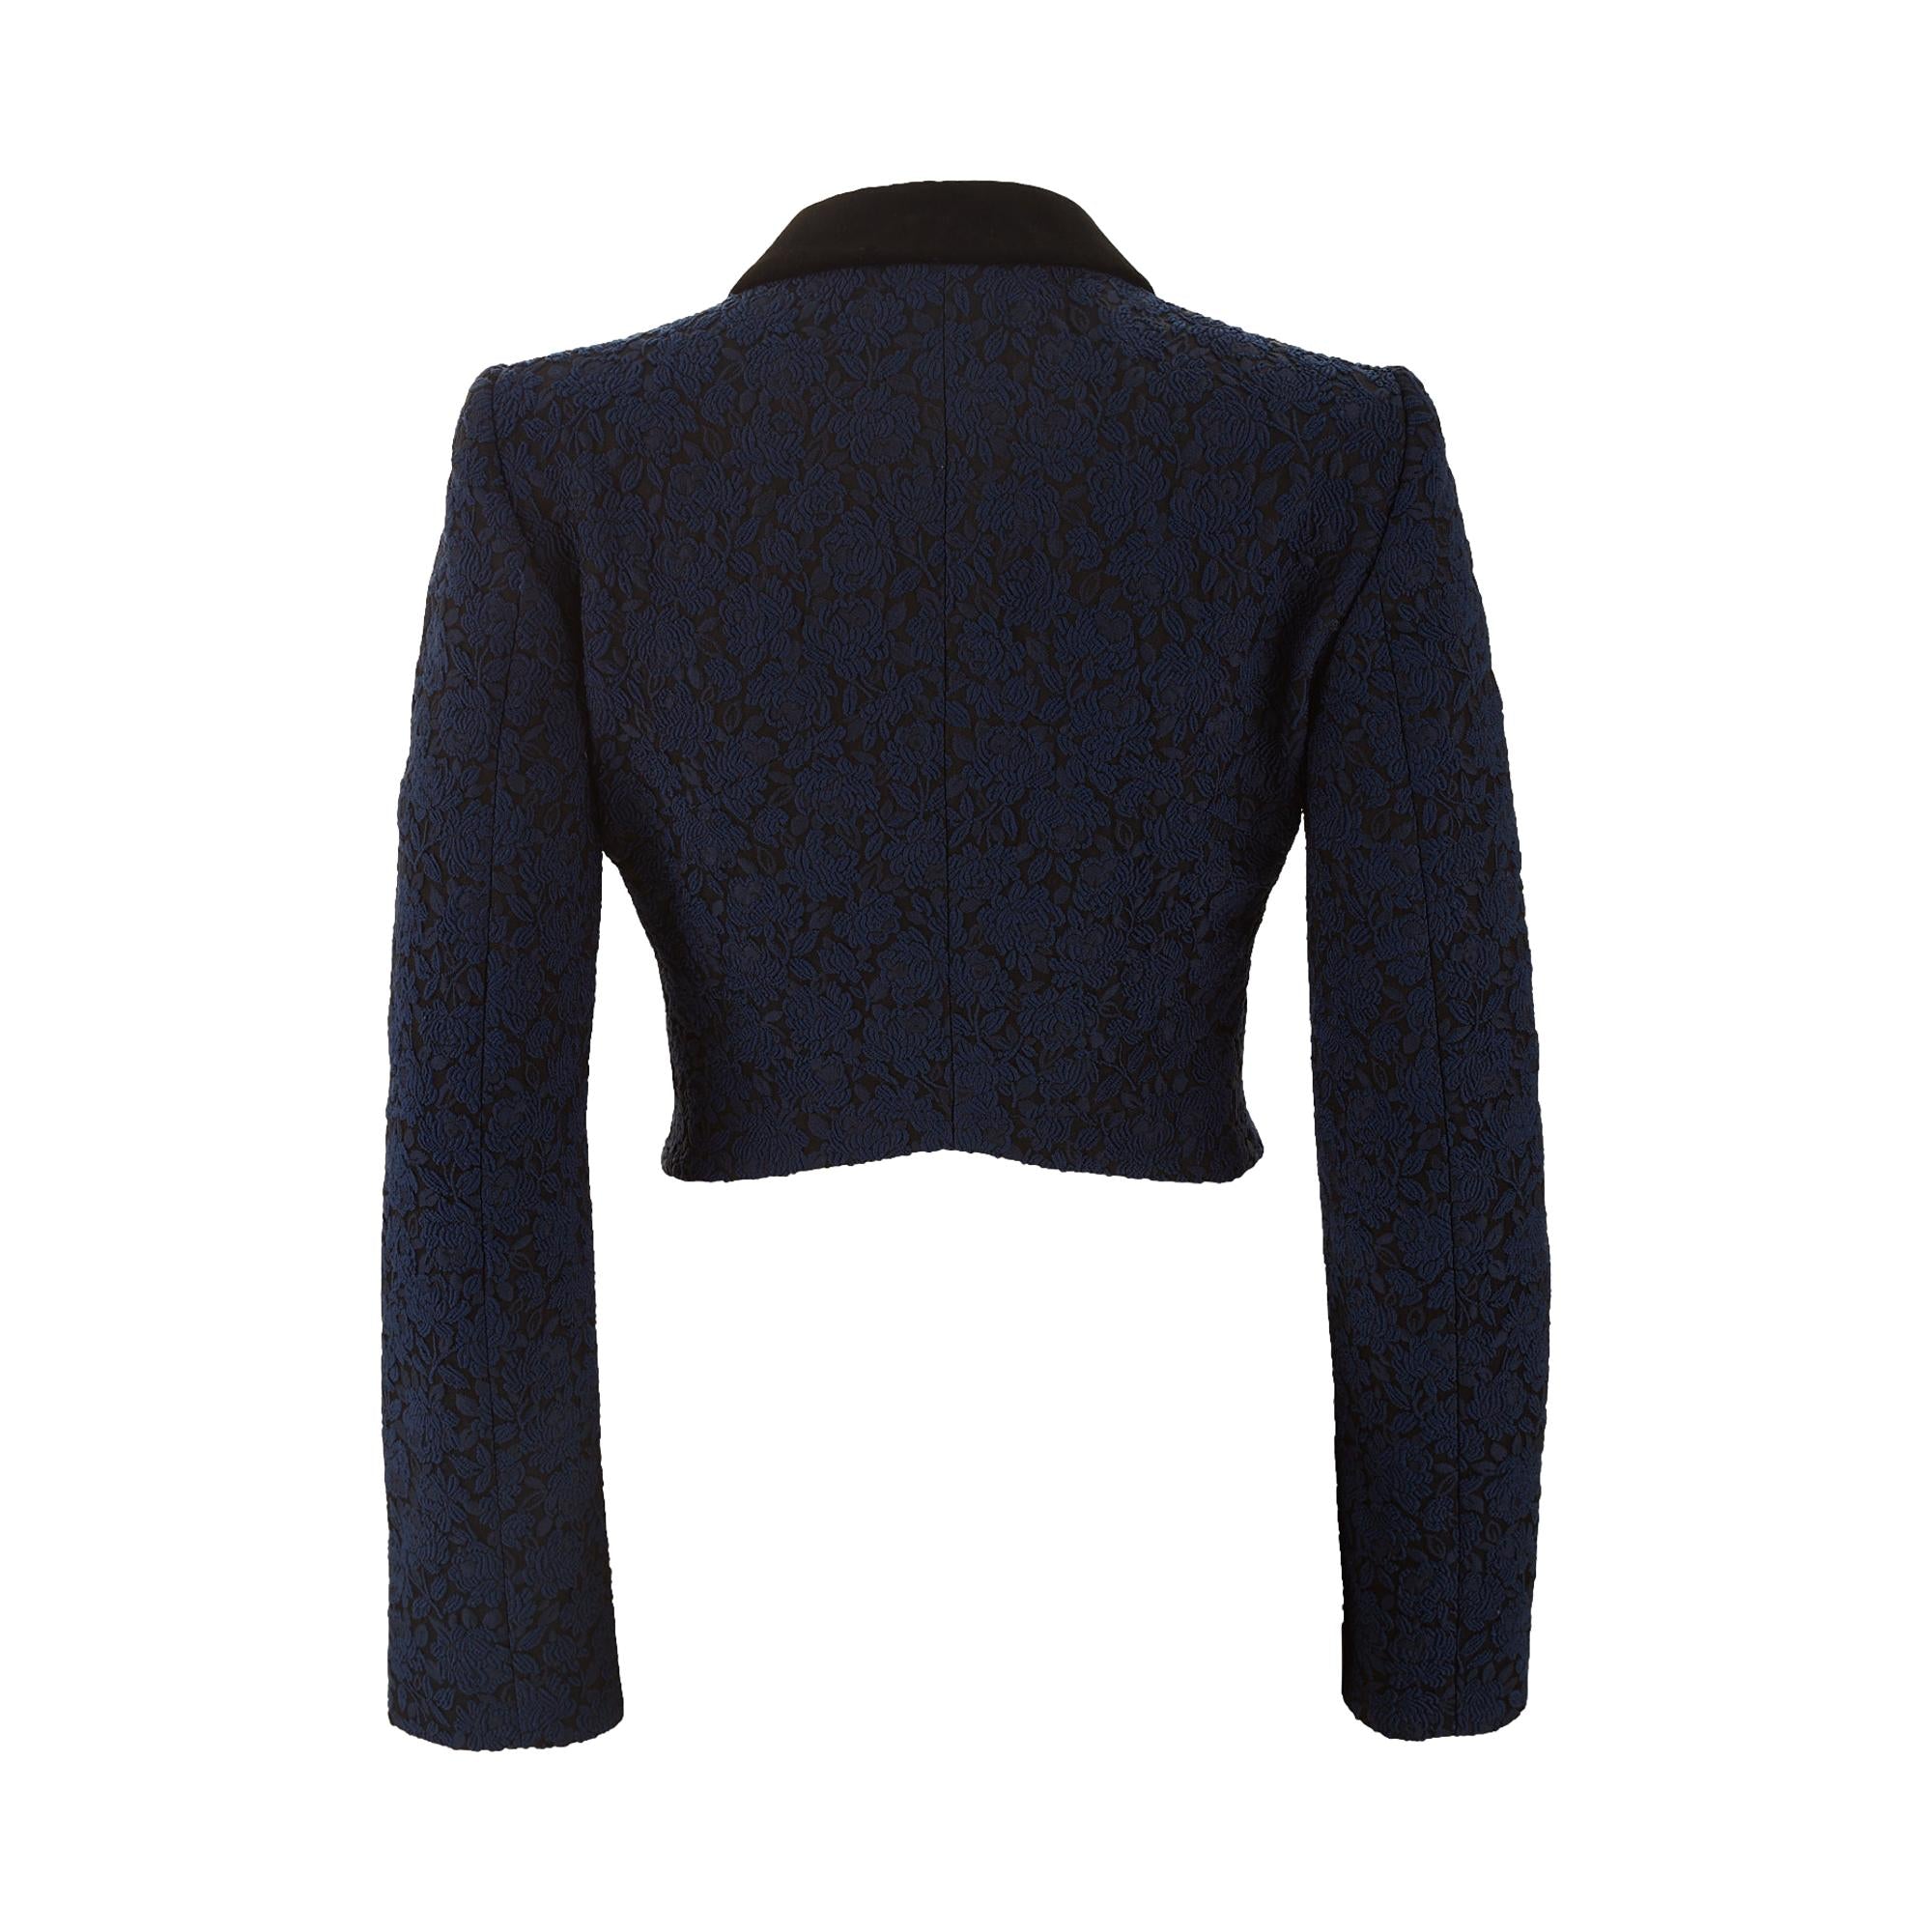 Moschino Navy Floral Jacket